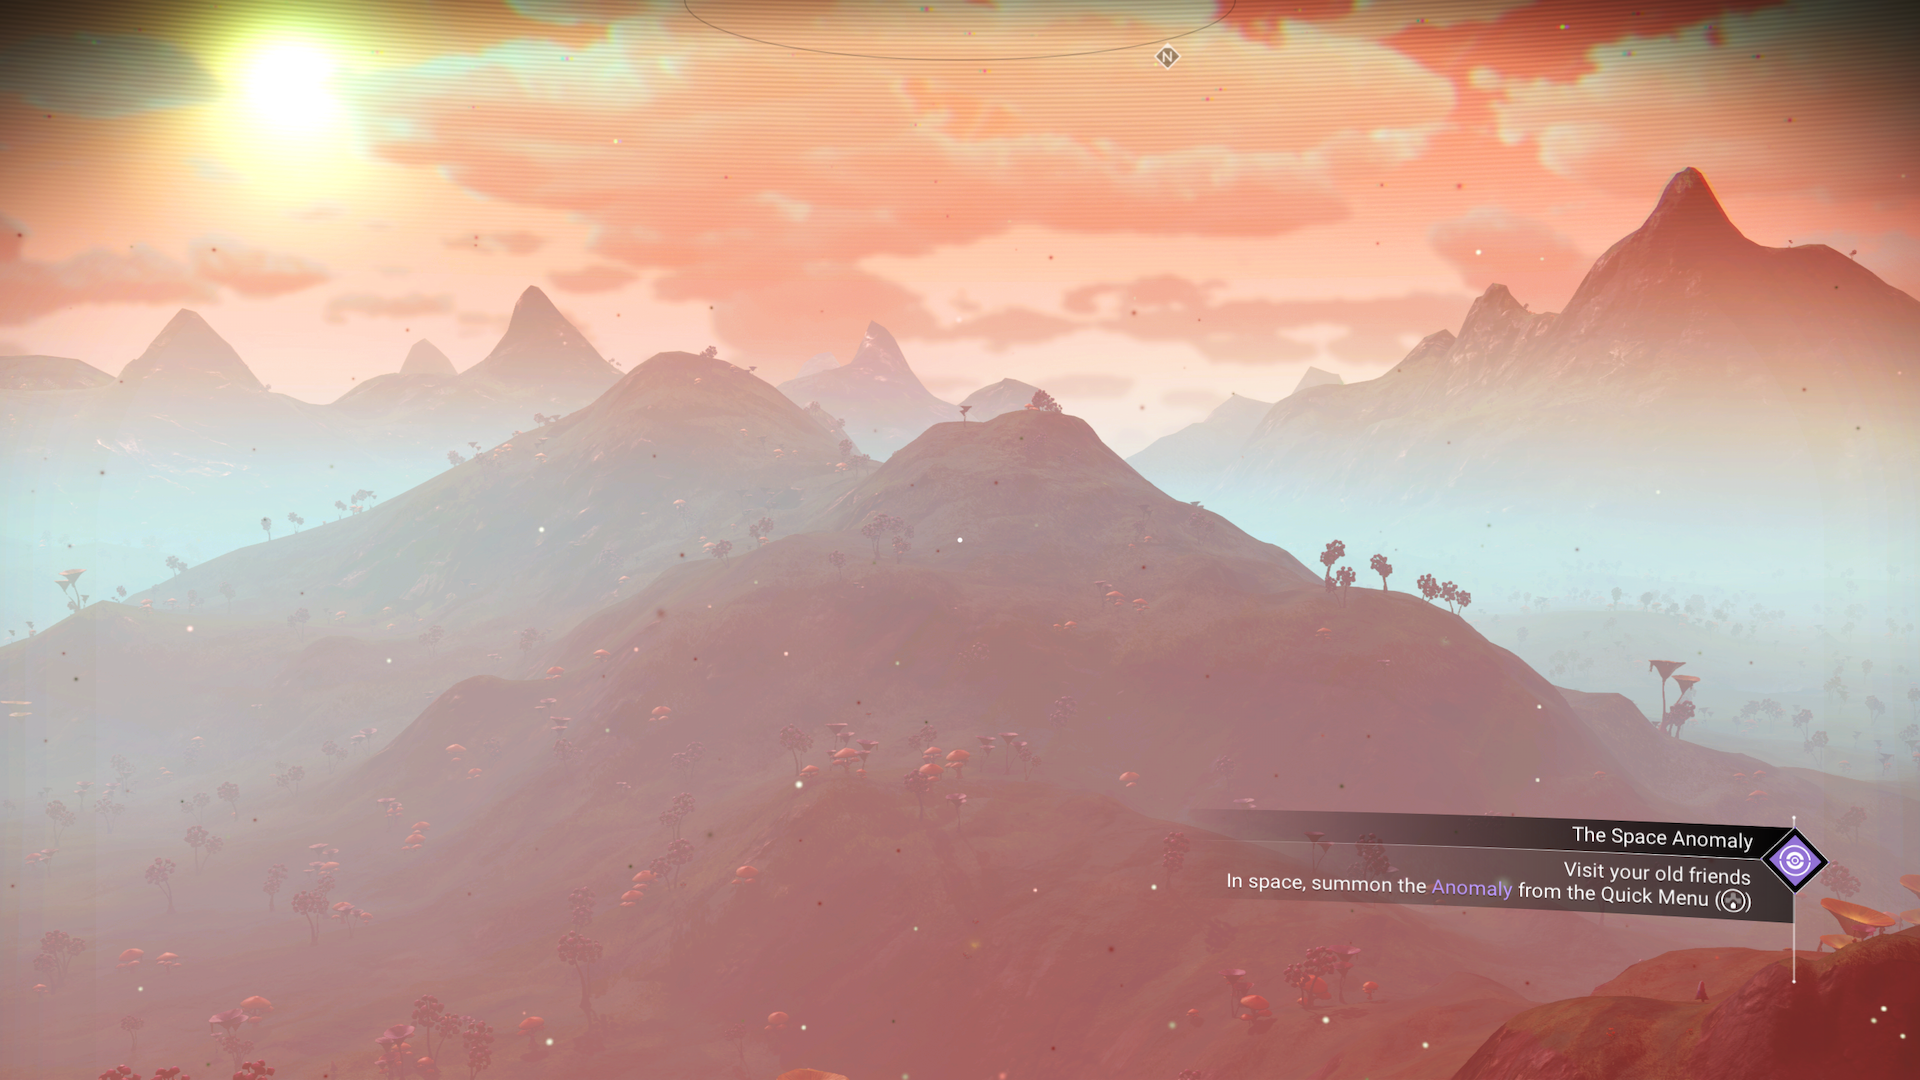 landscape screenshot (all images are taken directly from the game)